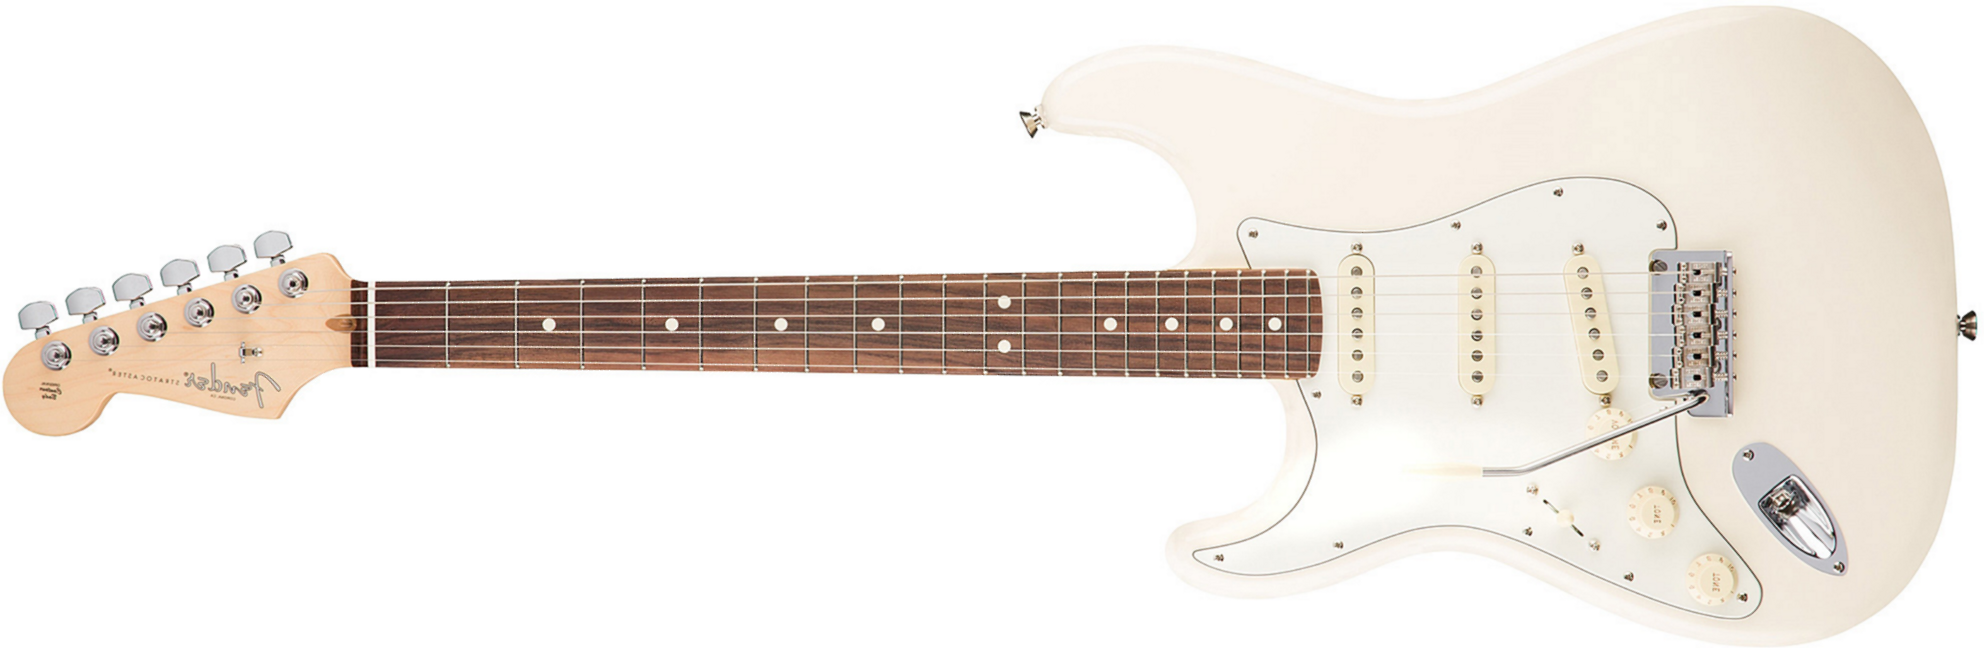 Fender Strat American Professional Lh Usa Gaucher 3s Rw - Olympic White - Left-handed electric guitar - Main picture